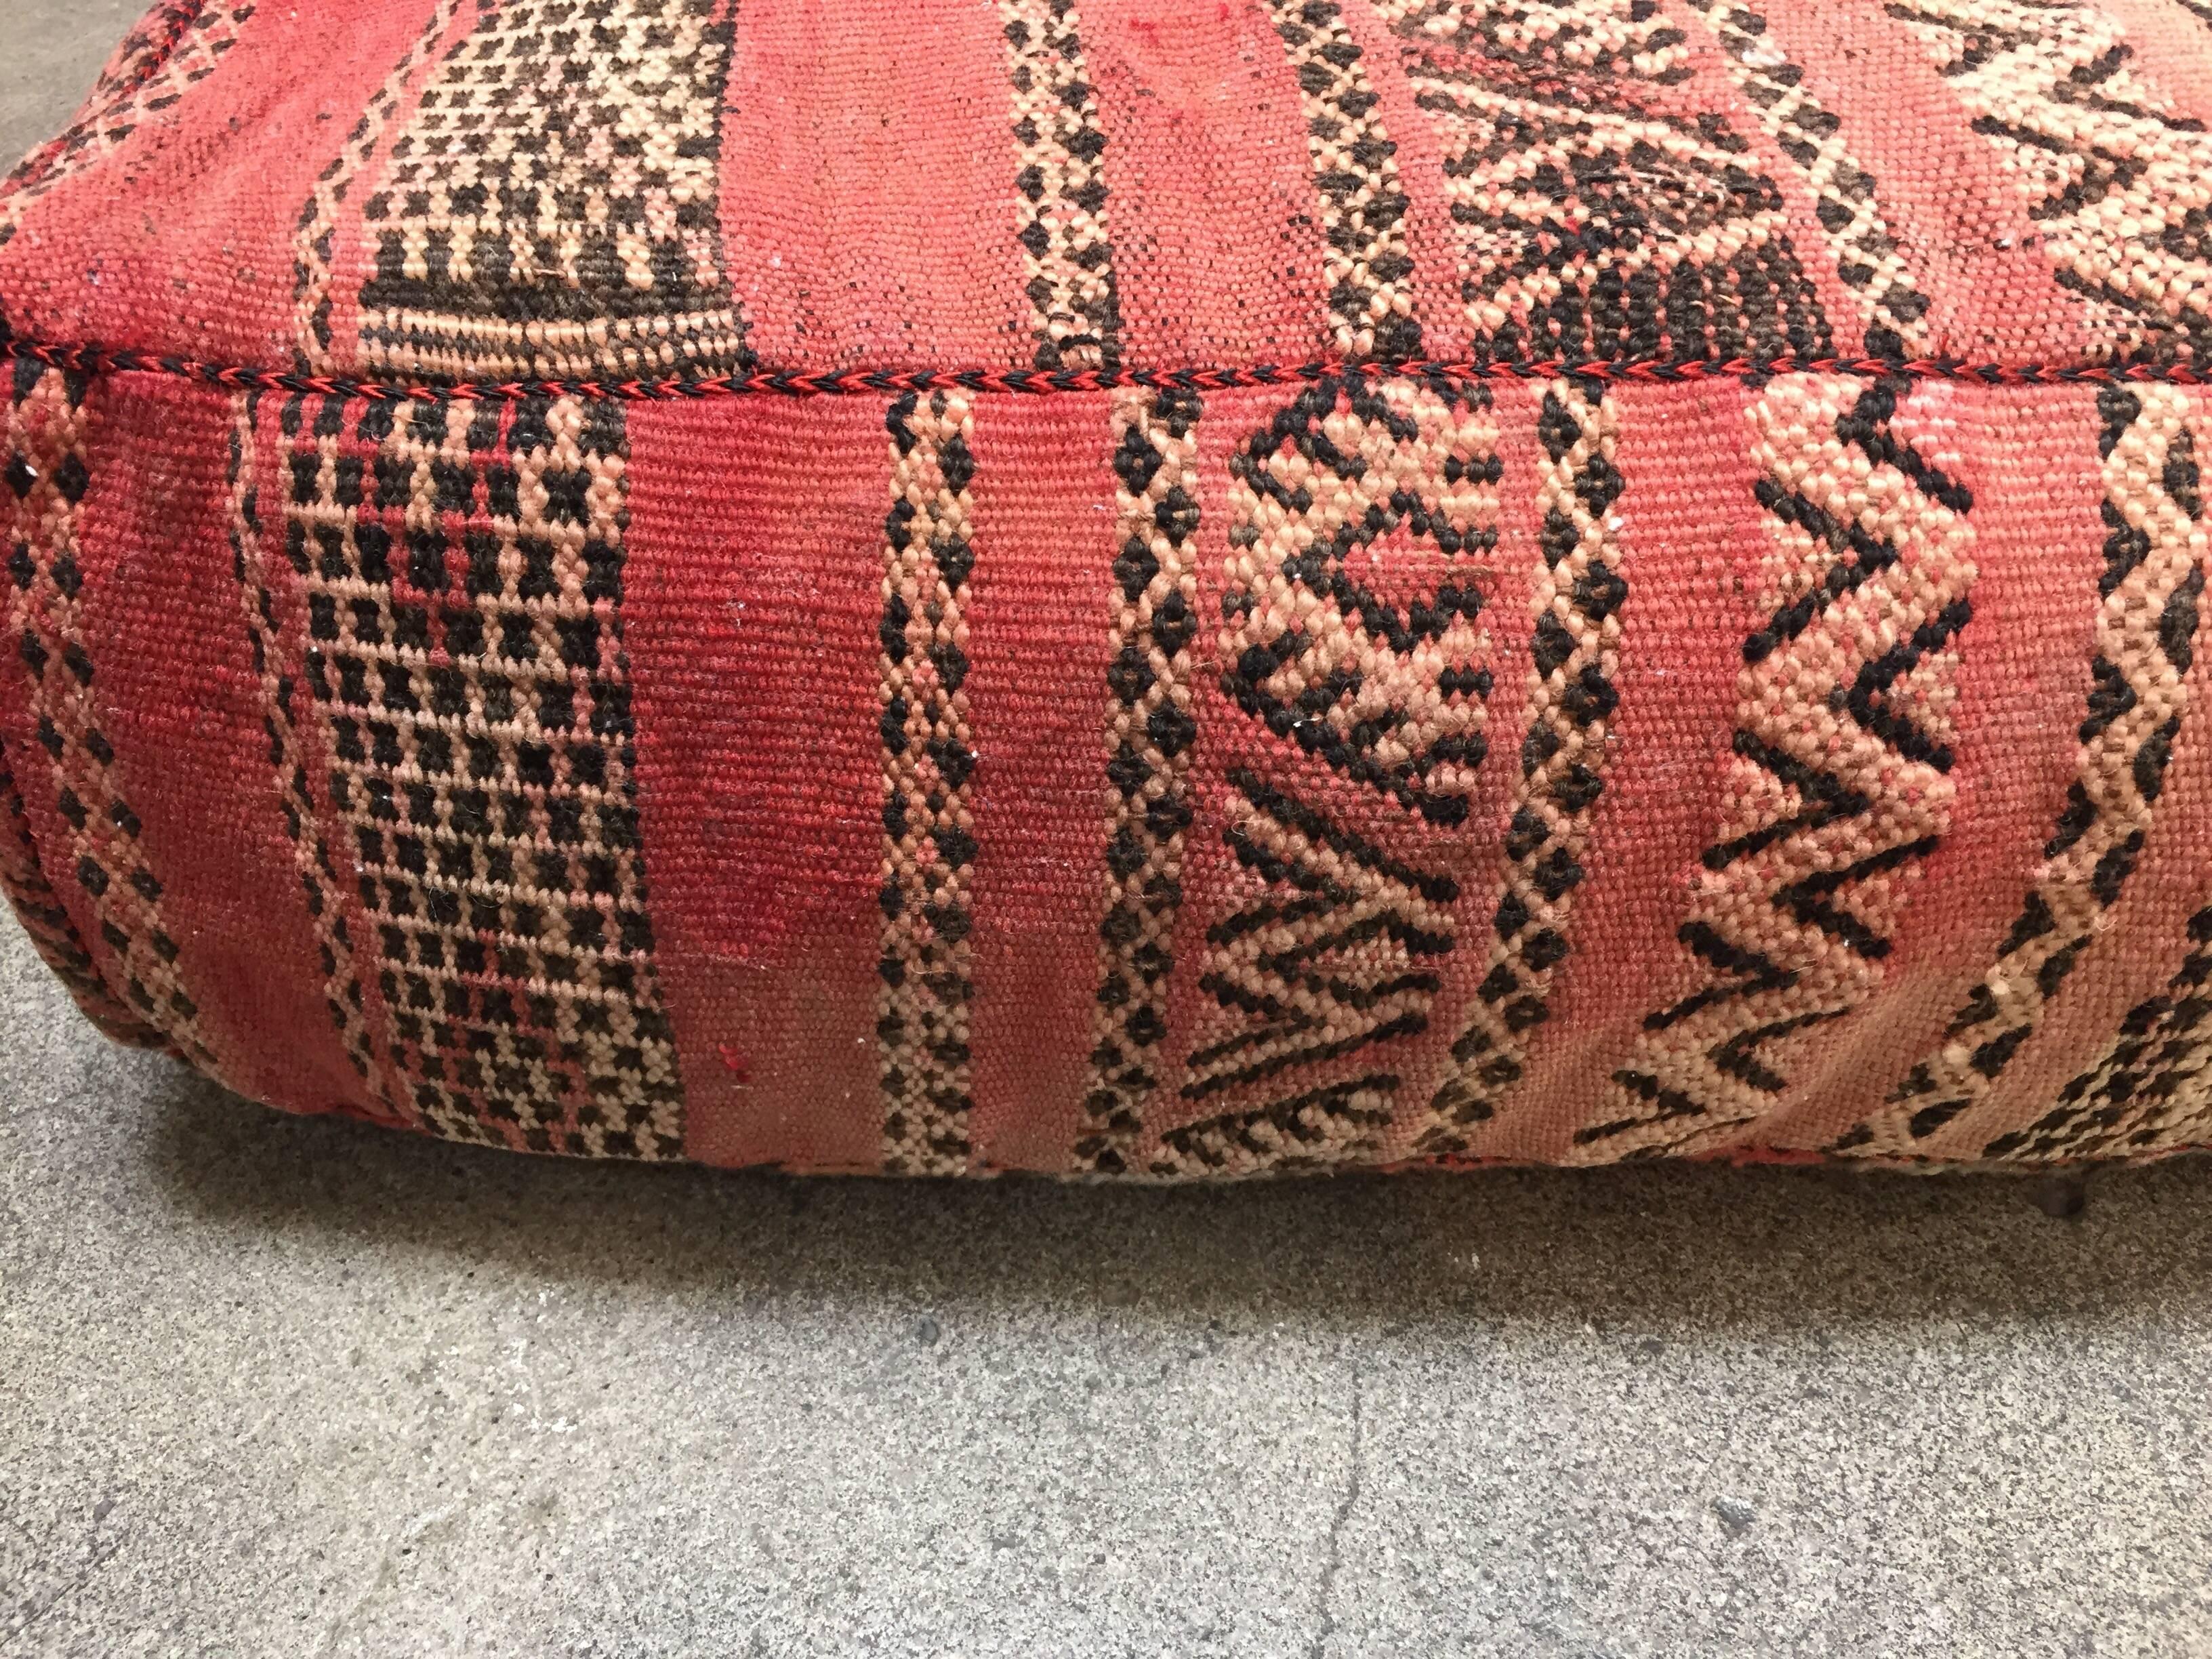 Moroccan Floor Pillow Tribal Seat Cushion Made from a Vintage Berber Rug 1